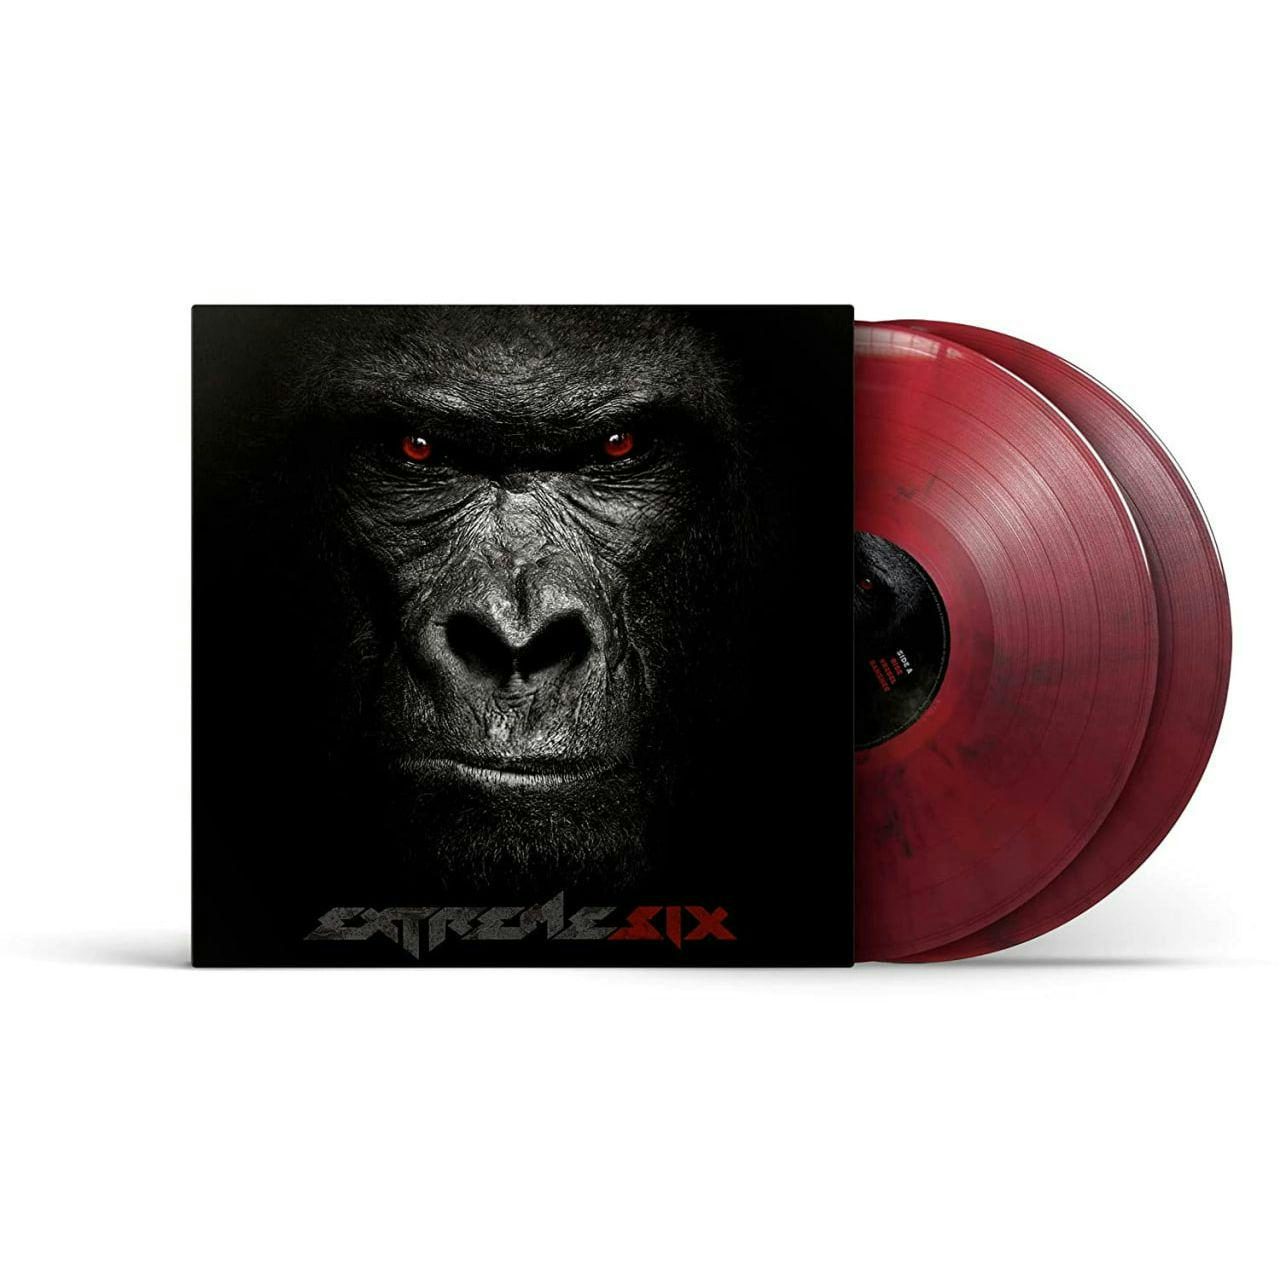 Extreme Six (2LP/Marbled Red & Black) Vinyl Record